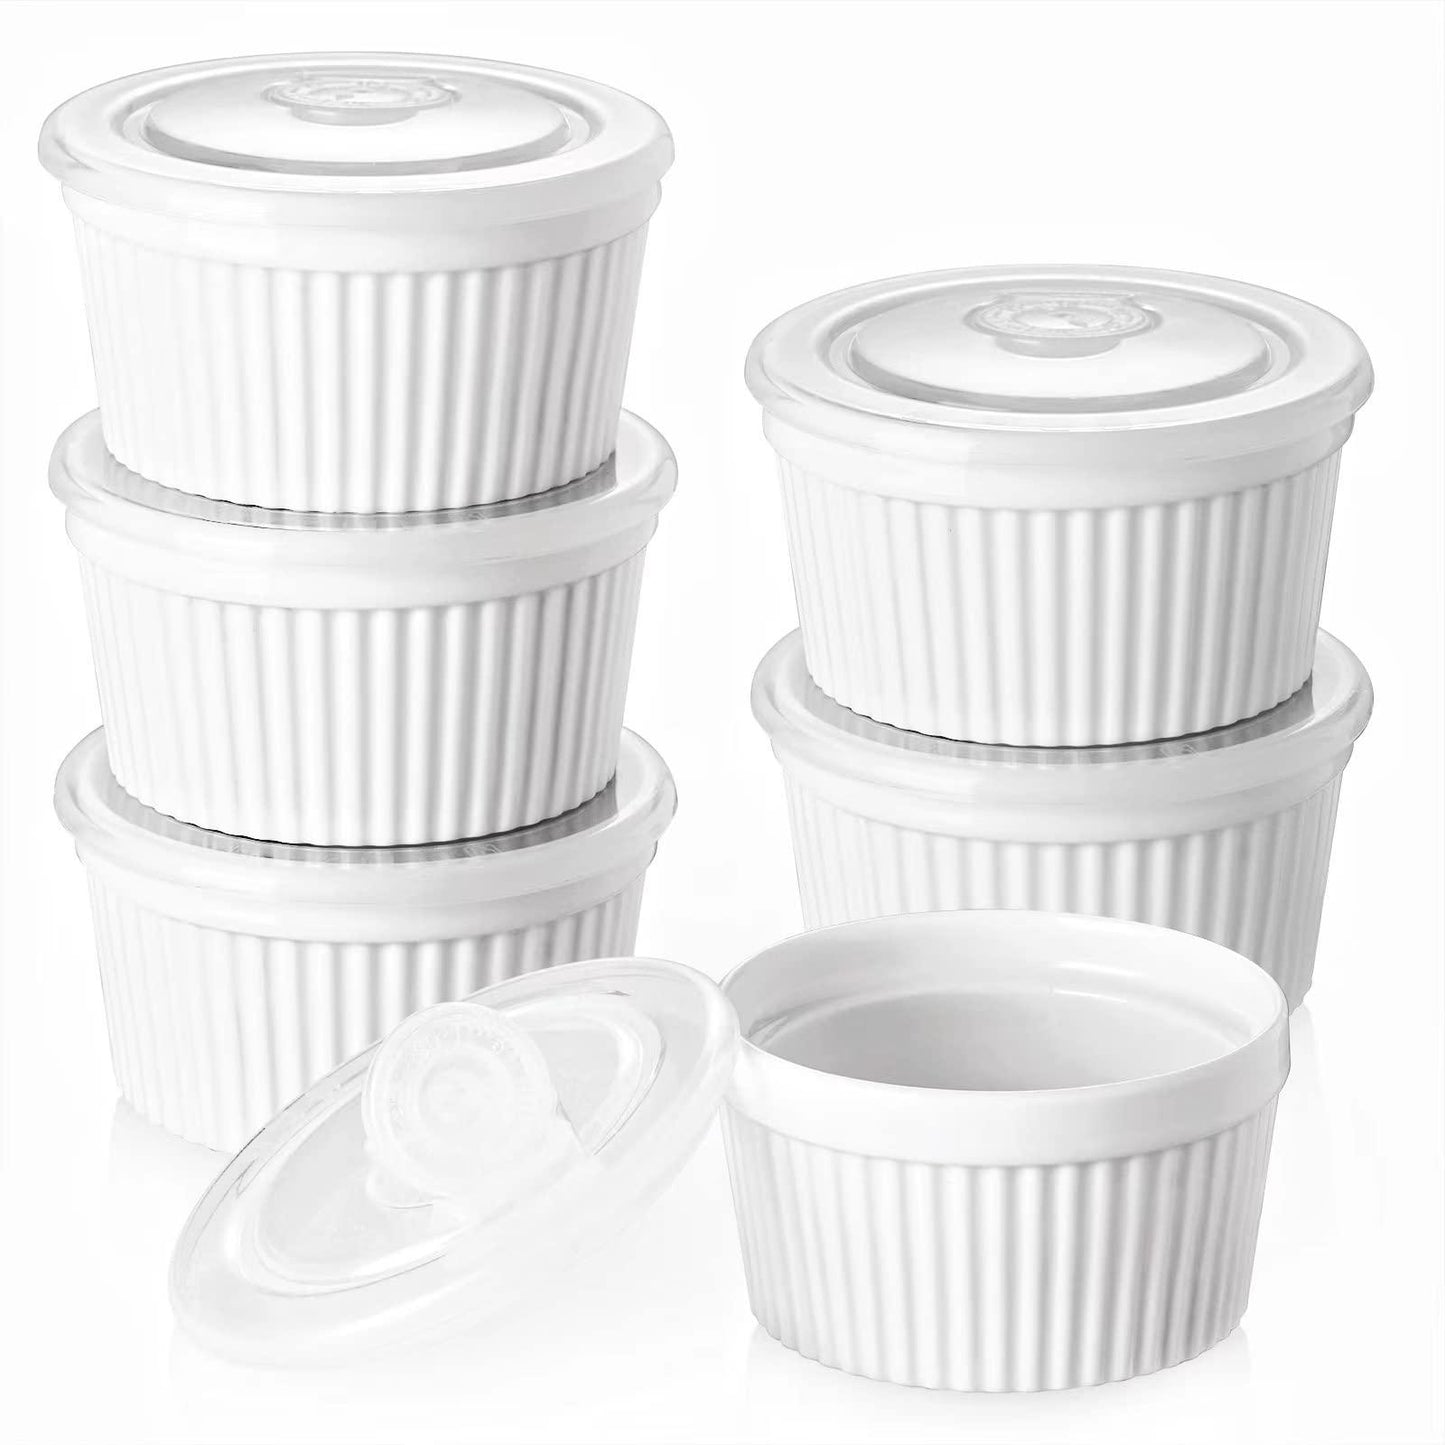 DOWAN Ramekins 8 oz Oven Safe with Lids, Creme brulee Ramekins Bowls with Covers, Porcelain White Ramekins Souffle Dishes for Baking, Stackable, Set of 6 - CookCave